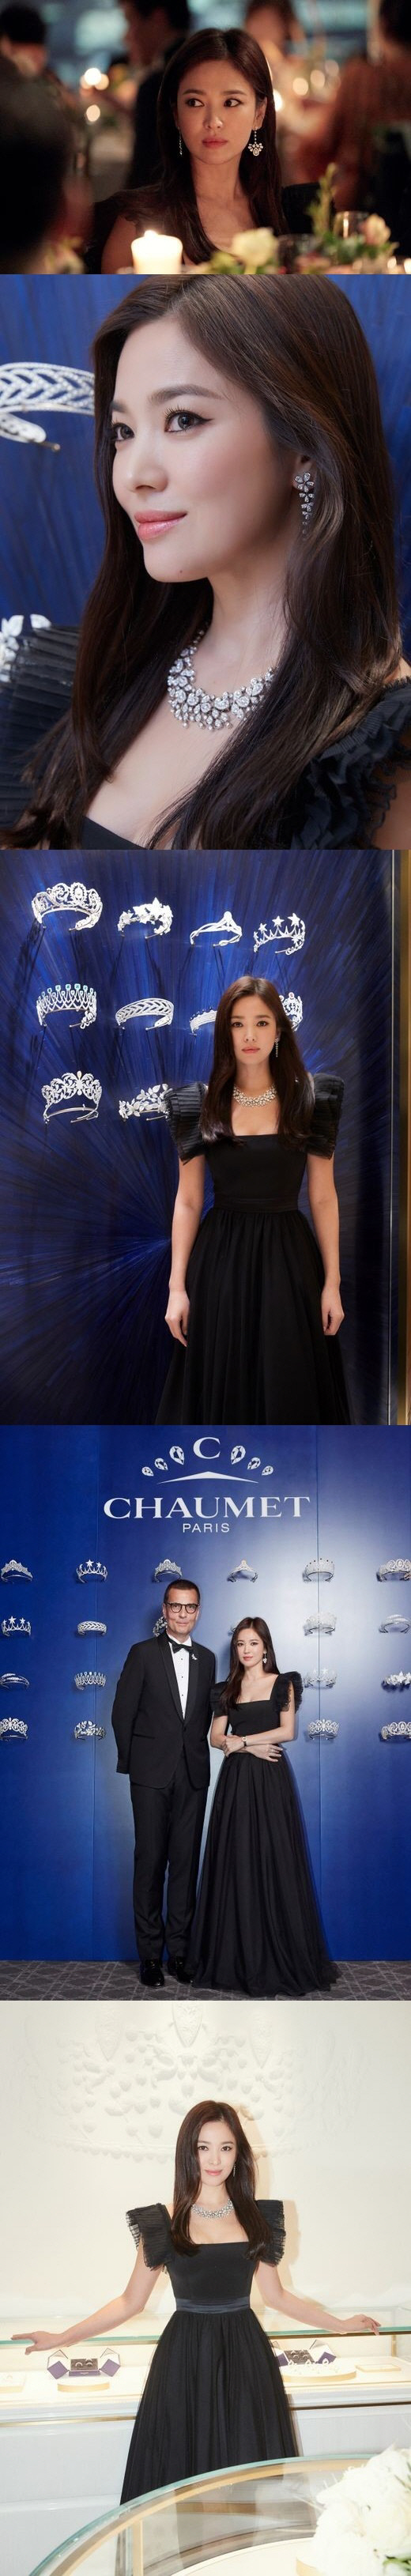 Actor Song Hye-kyo showed off her dazzling beautiful looks through Dinner showOn the 18th, the French imperial jewelery brand Shome unveiled the Gala Rizzatto dinner scene cuts held at the boutique opening ceremony and the incident event held at Lotte Department Store Avenue in Sogong-dong, Seoul on the afternoon of the 17th.Song Hye-kyo, who wore a simple black dress and colorful jewelery and attended the Gala Rizzatto Dinner show, attracted attention with her alluring yet elegant look.Song Hye-kyo and Shome have canceled their personal photo call event in memory of the late Sully.Song Hye-kyo attended an informal internal event that went ahead as scheduled, except for photocalls, and met with brand officials.